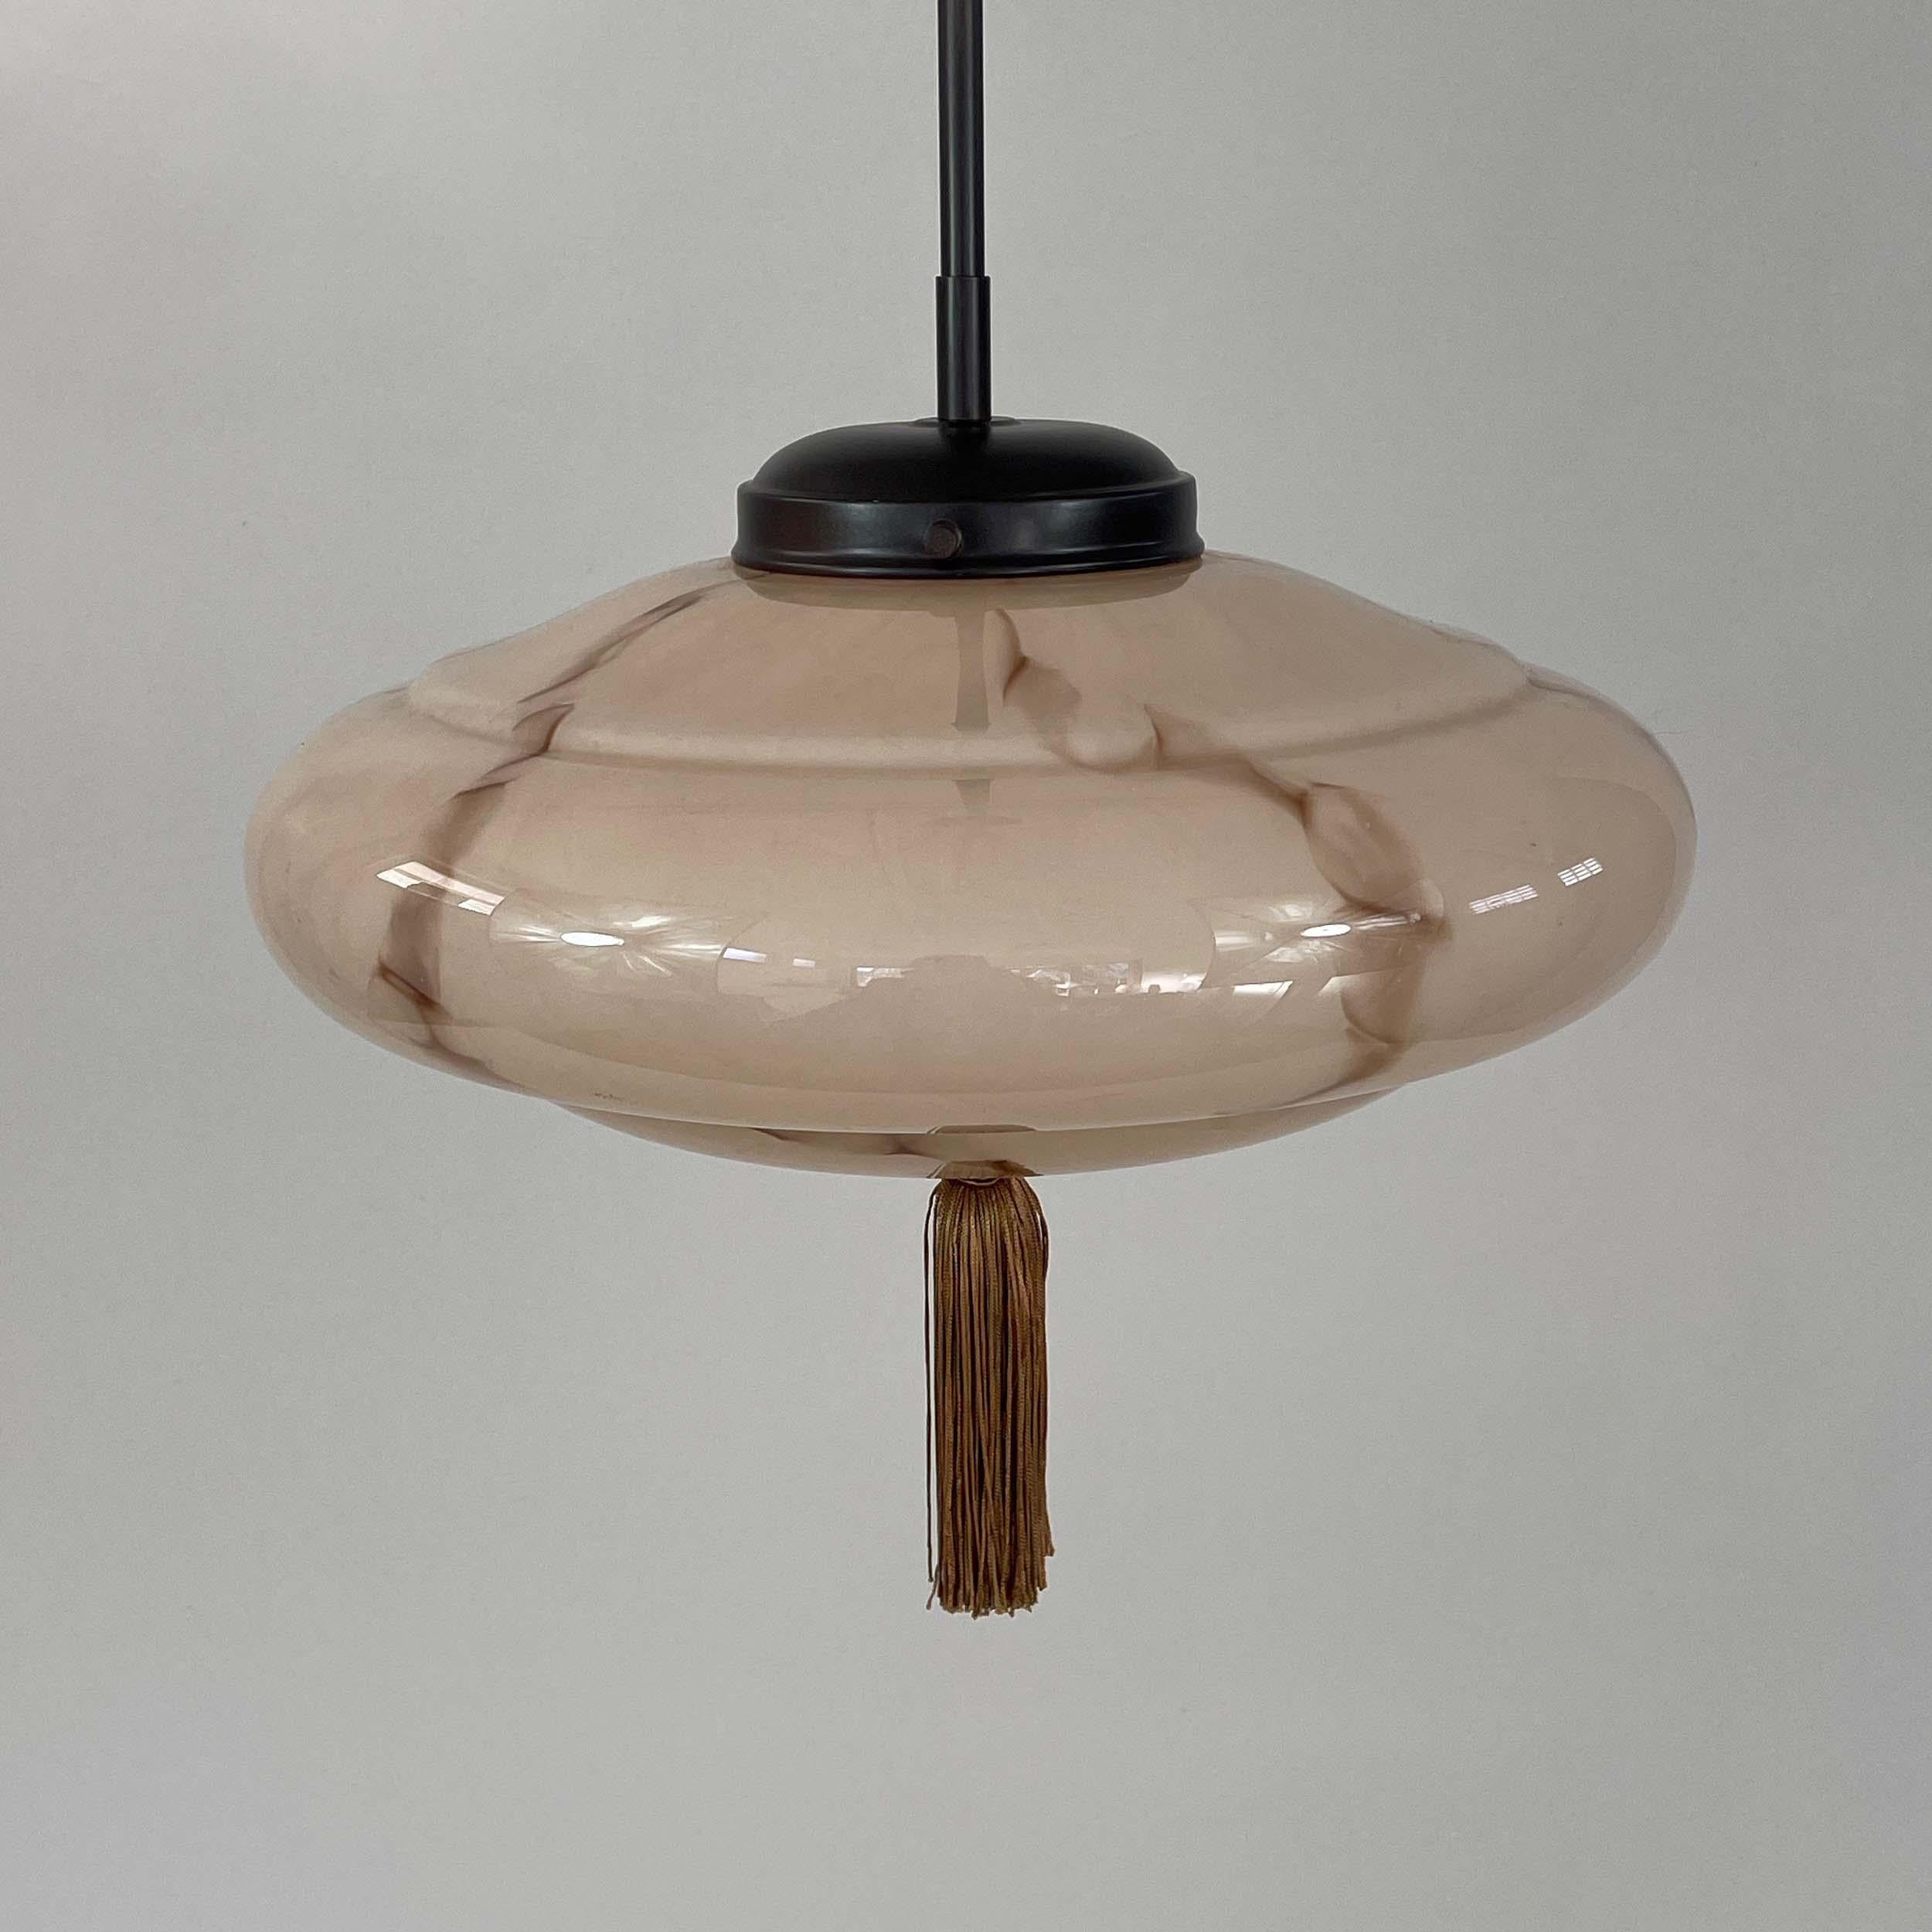 Mid-20th Century Art Deco Marbled Opaline Glass & Bronzed Brass Pendant, Germany 1920s to 1930s